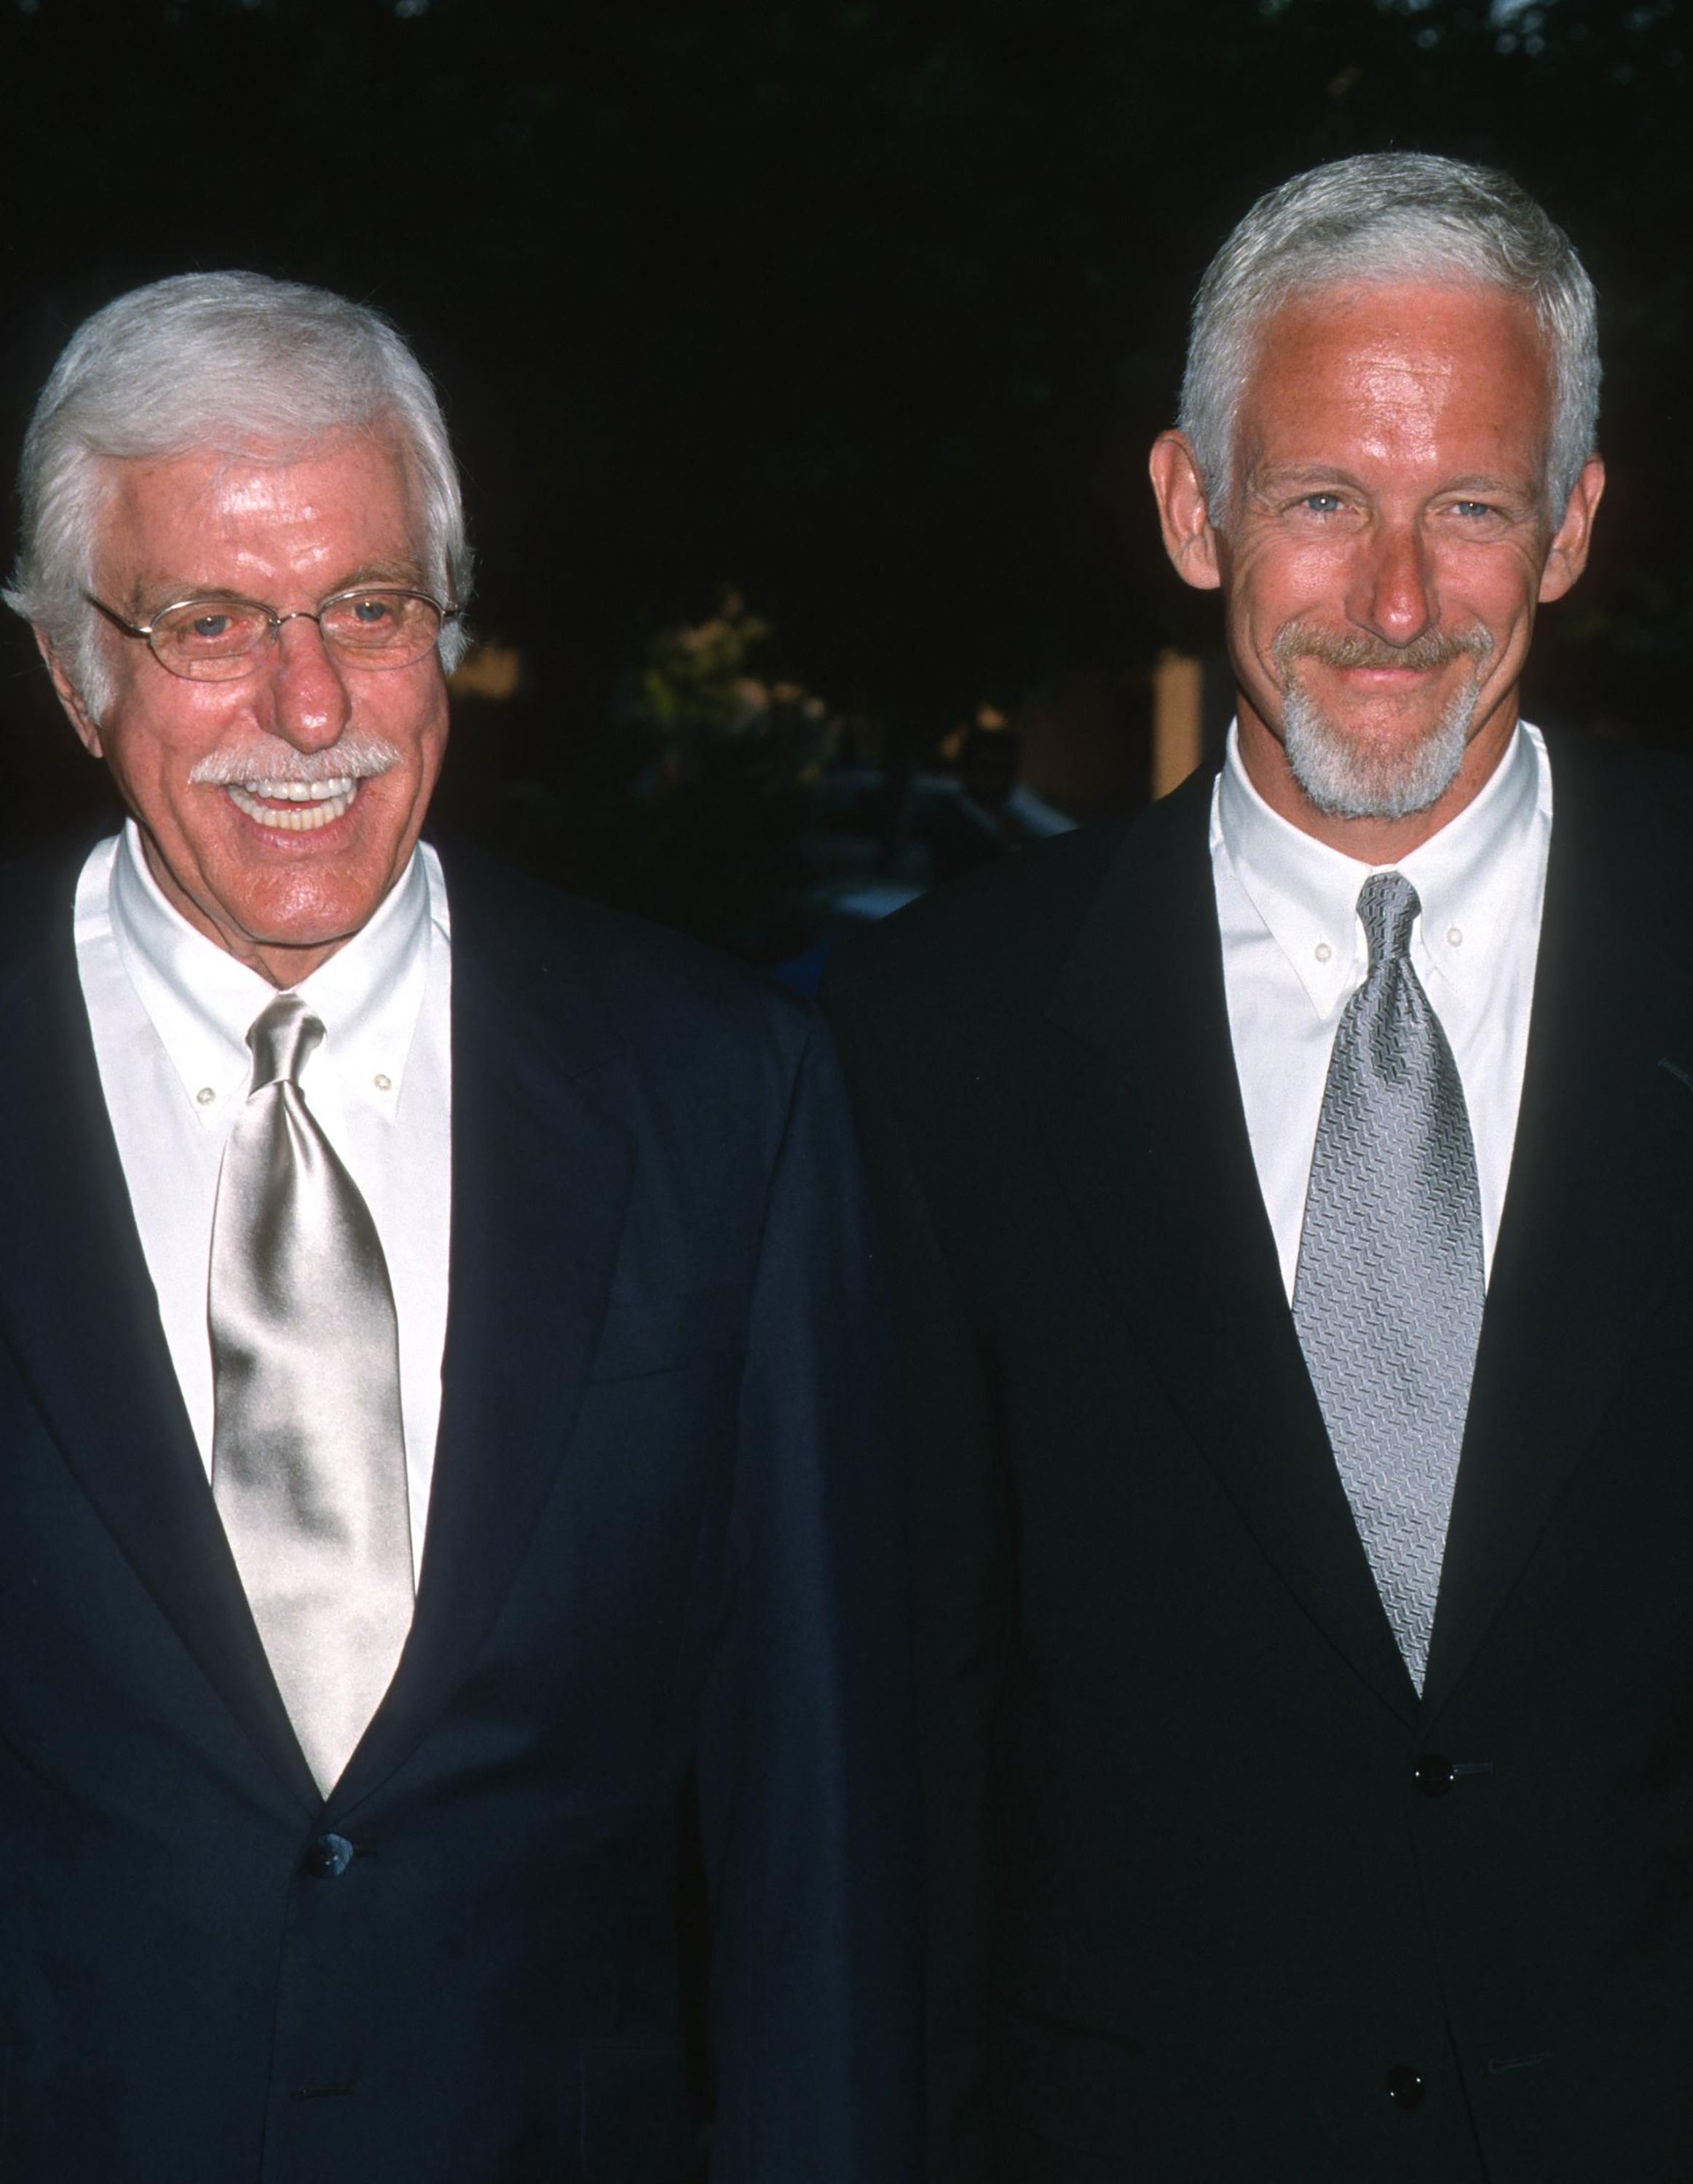 Dick and Chris Van Dyke at Summer Television Critic Association Awards Luncheon in Pasadena, California on July 15, 2000. | Source: Ron Galella, Ltd./Ron Galella Collection/Getty Images